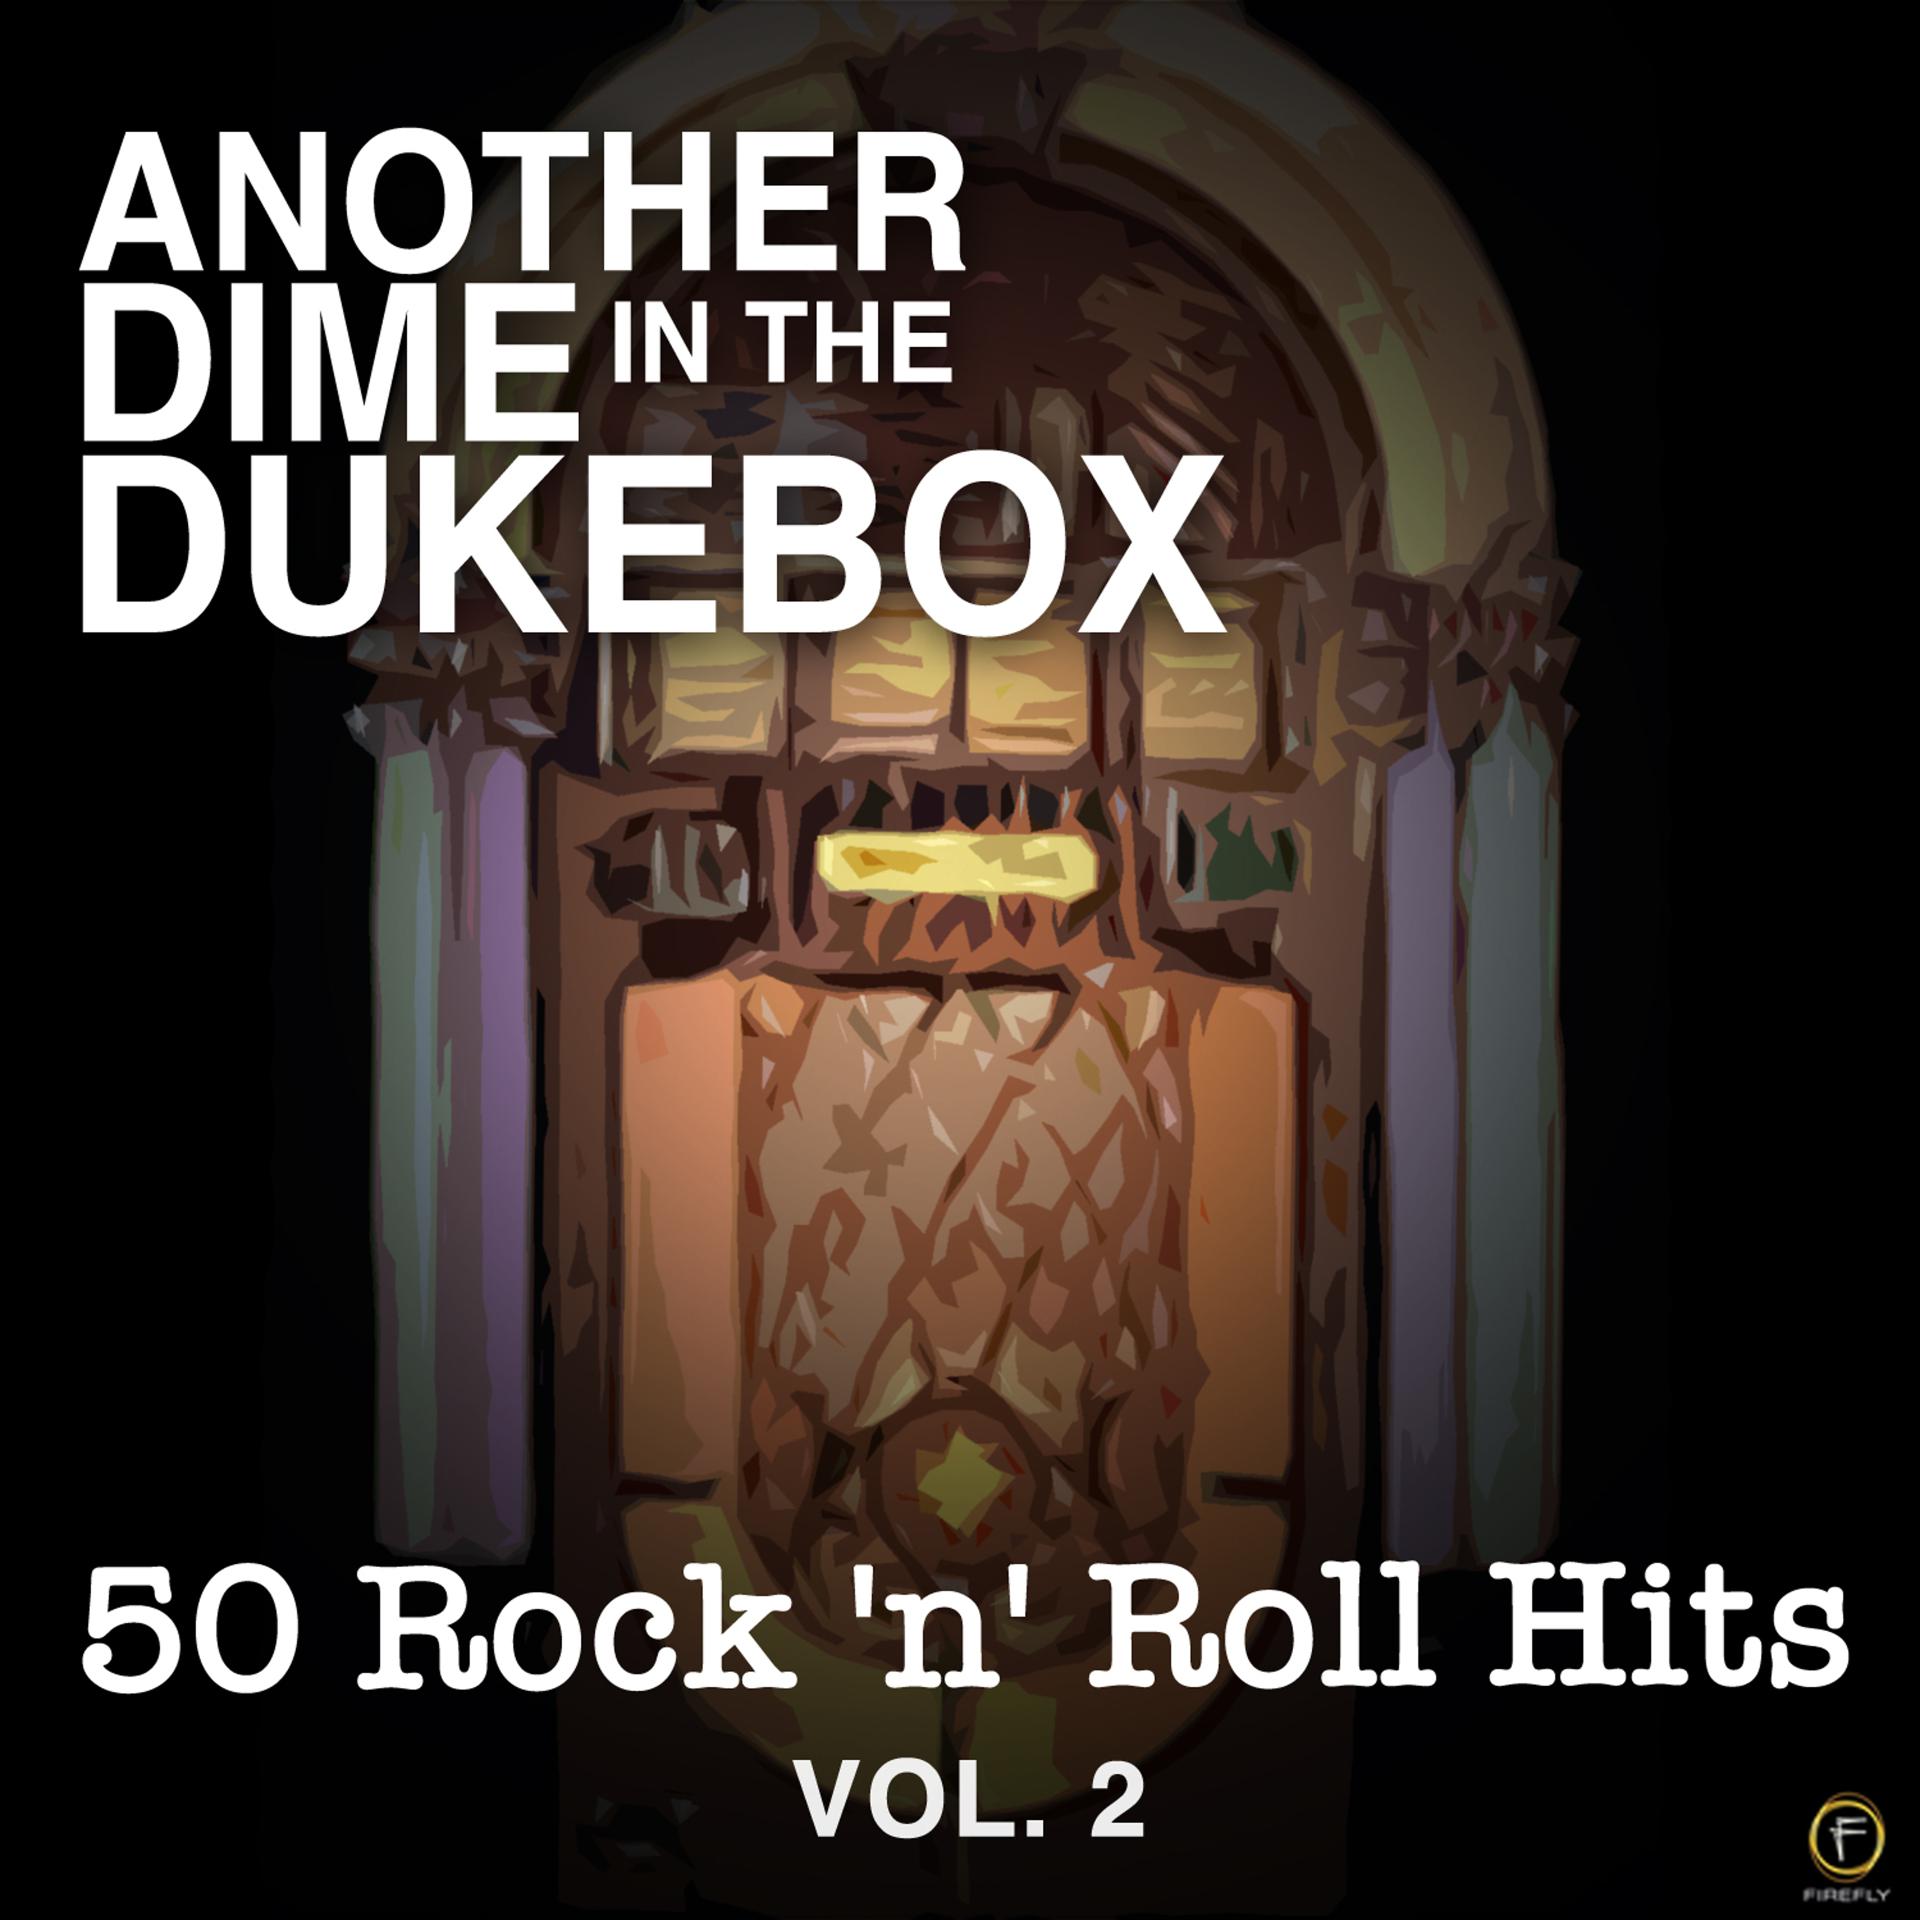 Постер альбома Another Dime in the Dukebox, 50 Rock 'N' Roll Hits Vol. 2